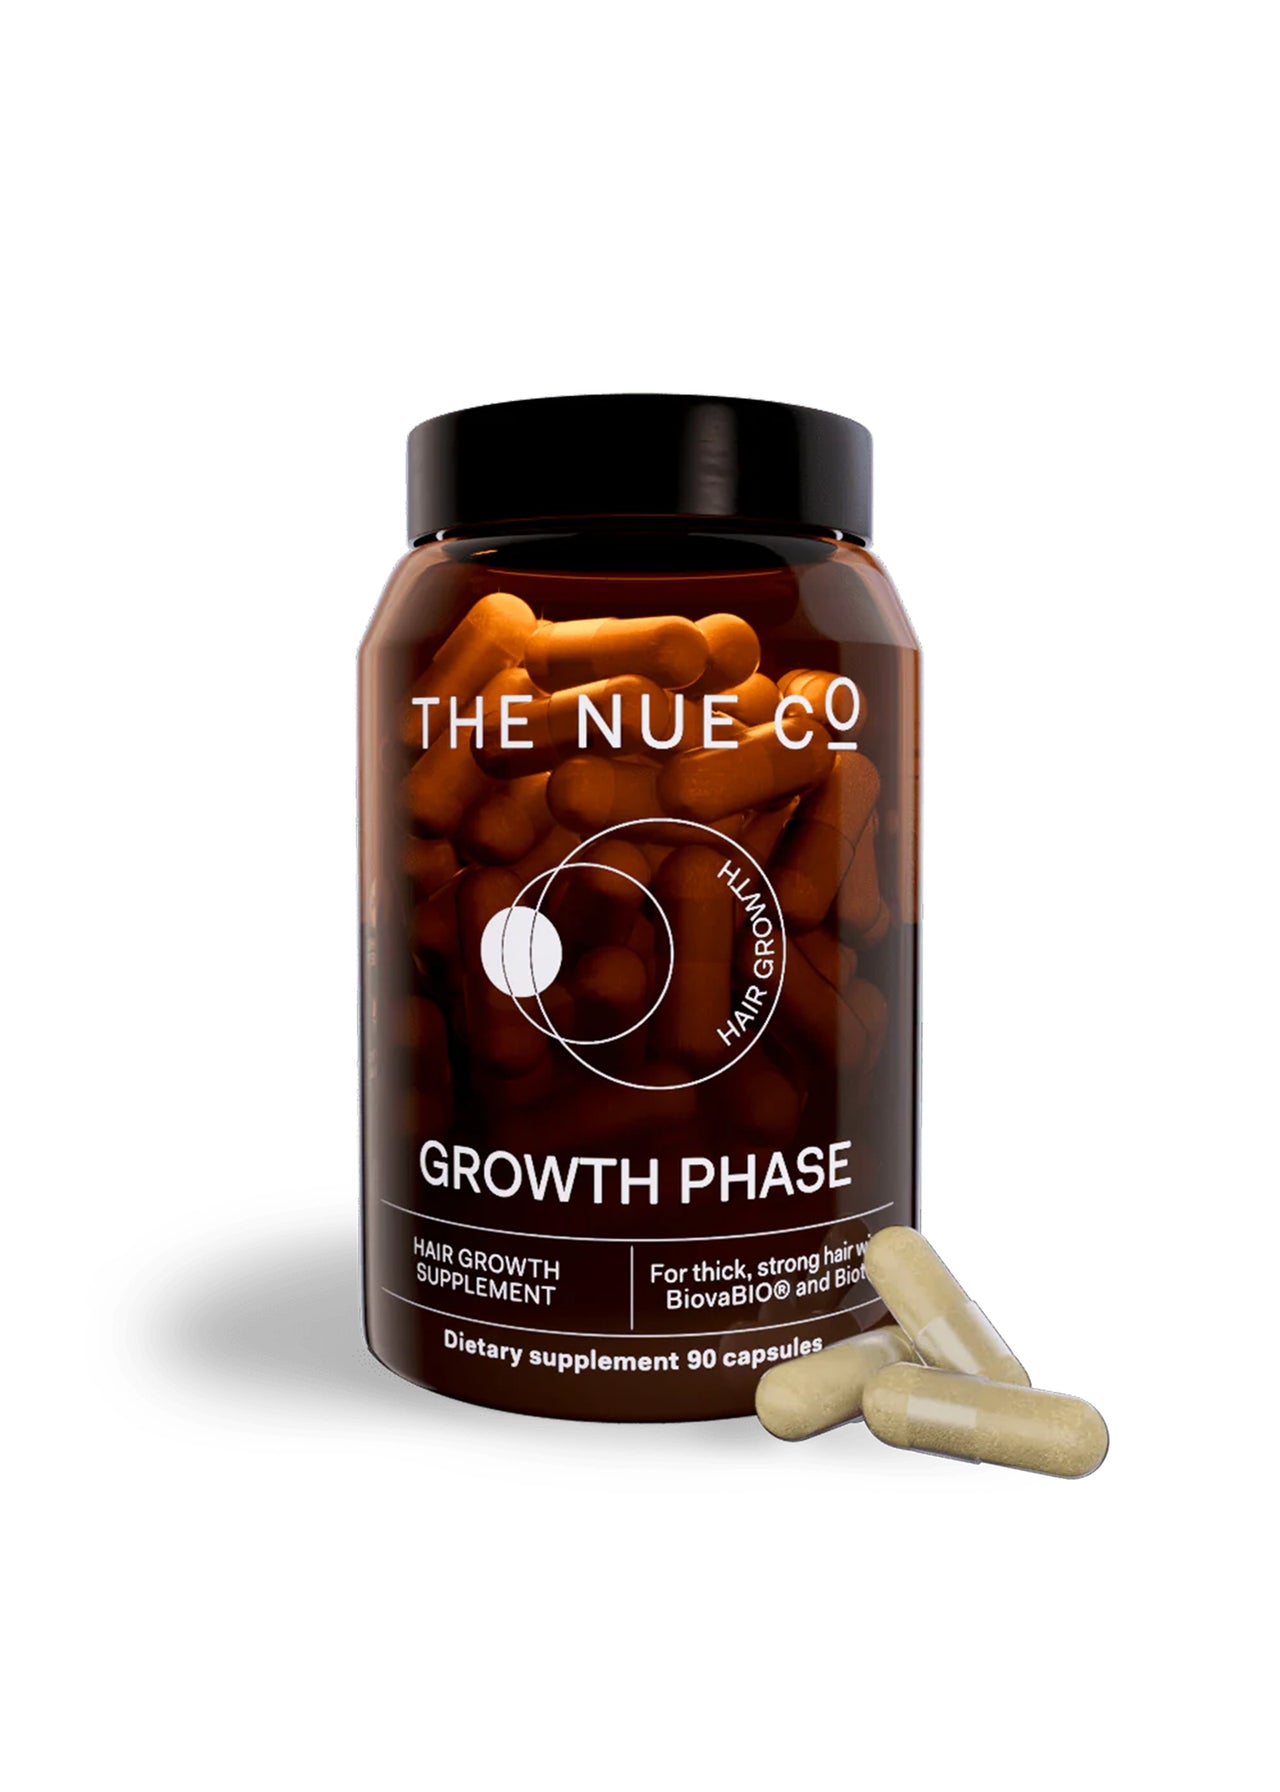 THE NUE CO Growth Phase Hair Supplement